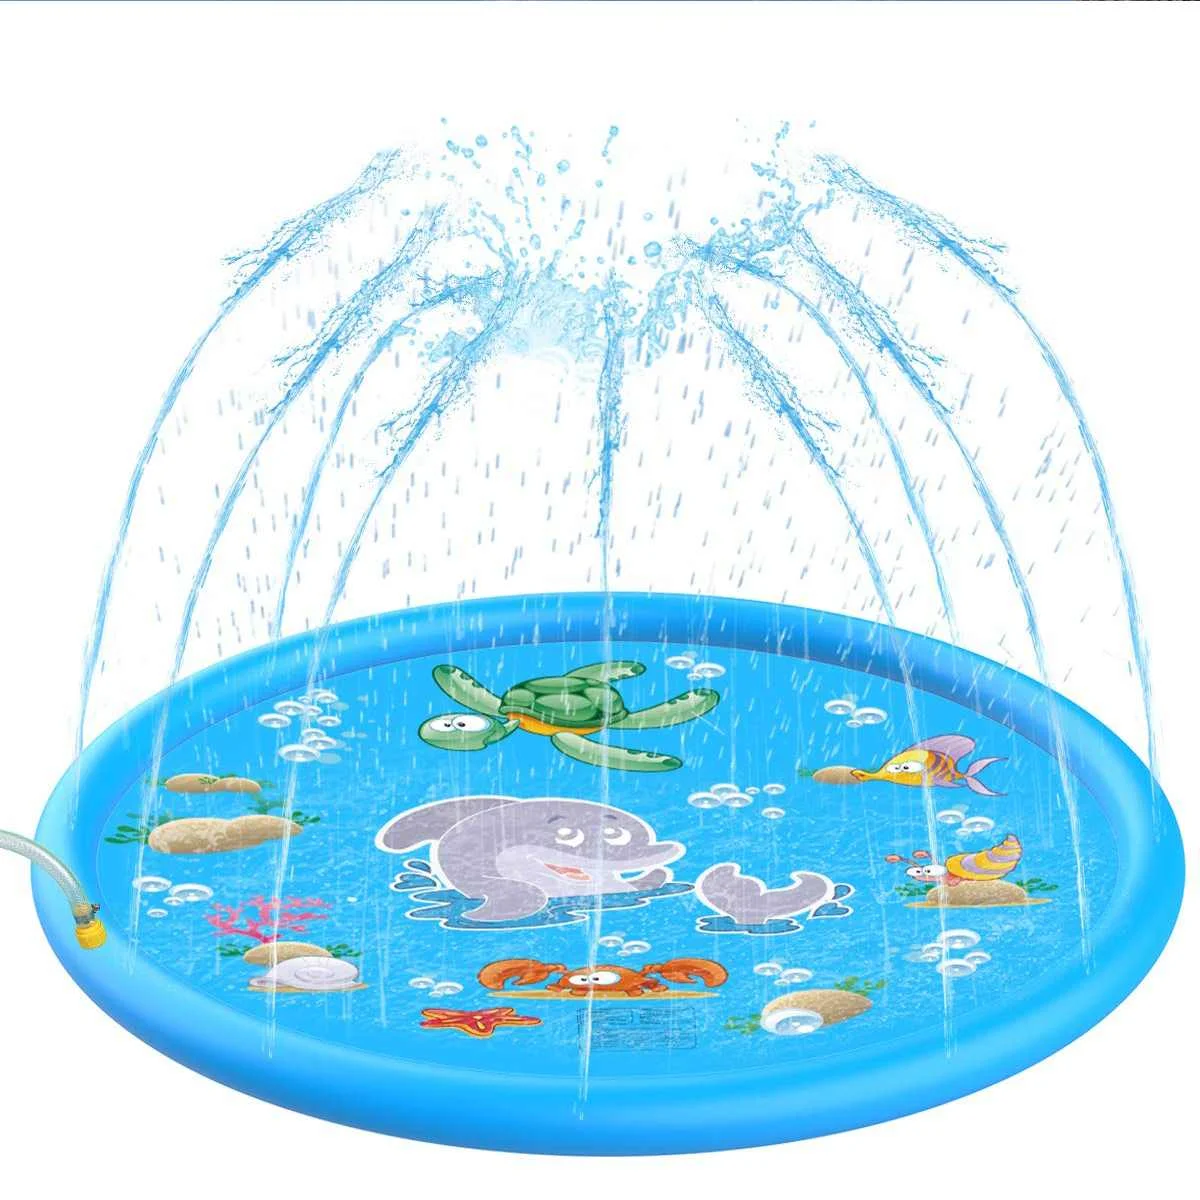 

Inflatable Sprinkler Pad Water Play Mat Sprinkle and Splash Play Mat toy for Outdoor Swimming Beach Lawn Children Kids 170 CM